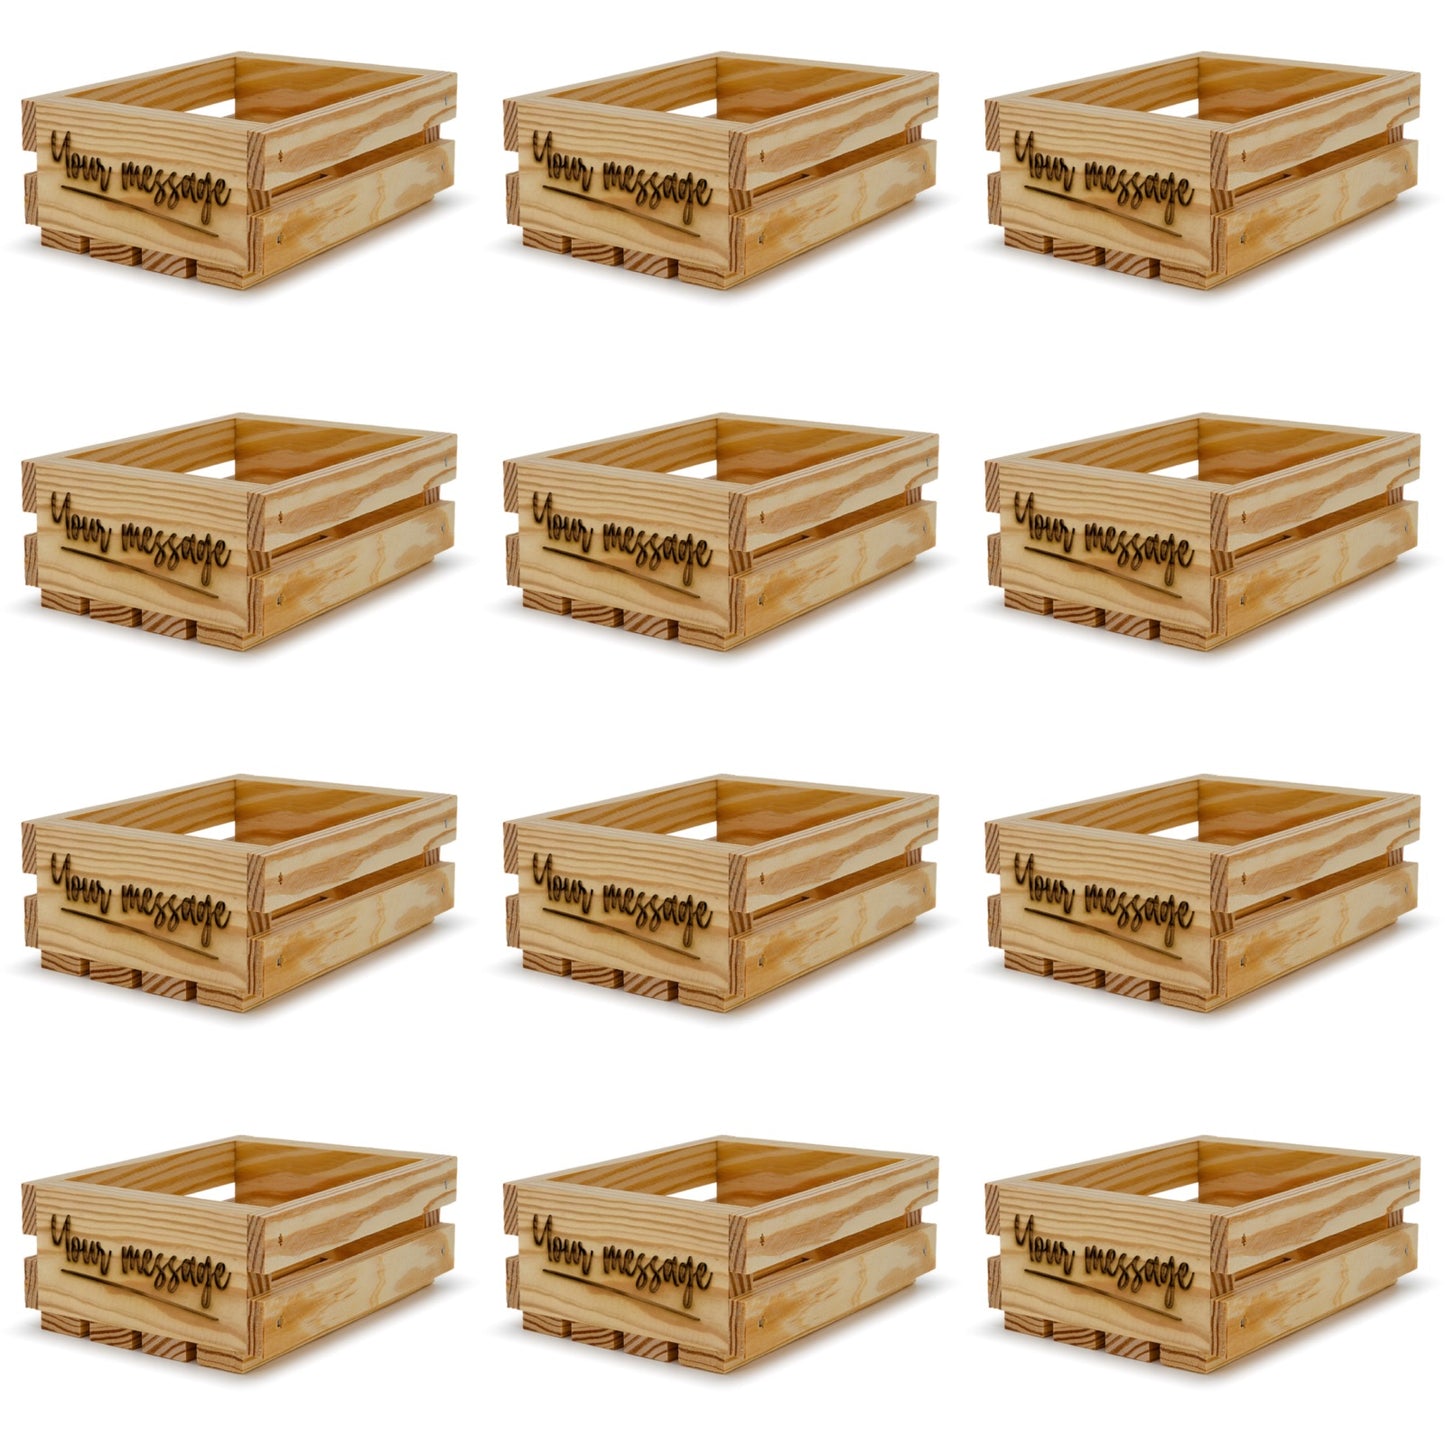 12 Small wooden crates 6x5x2.5 your message included